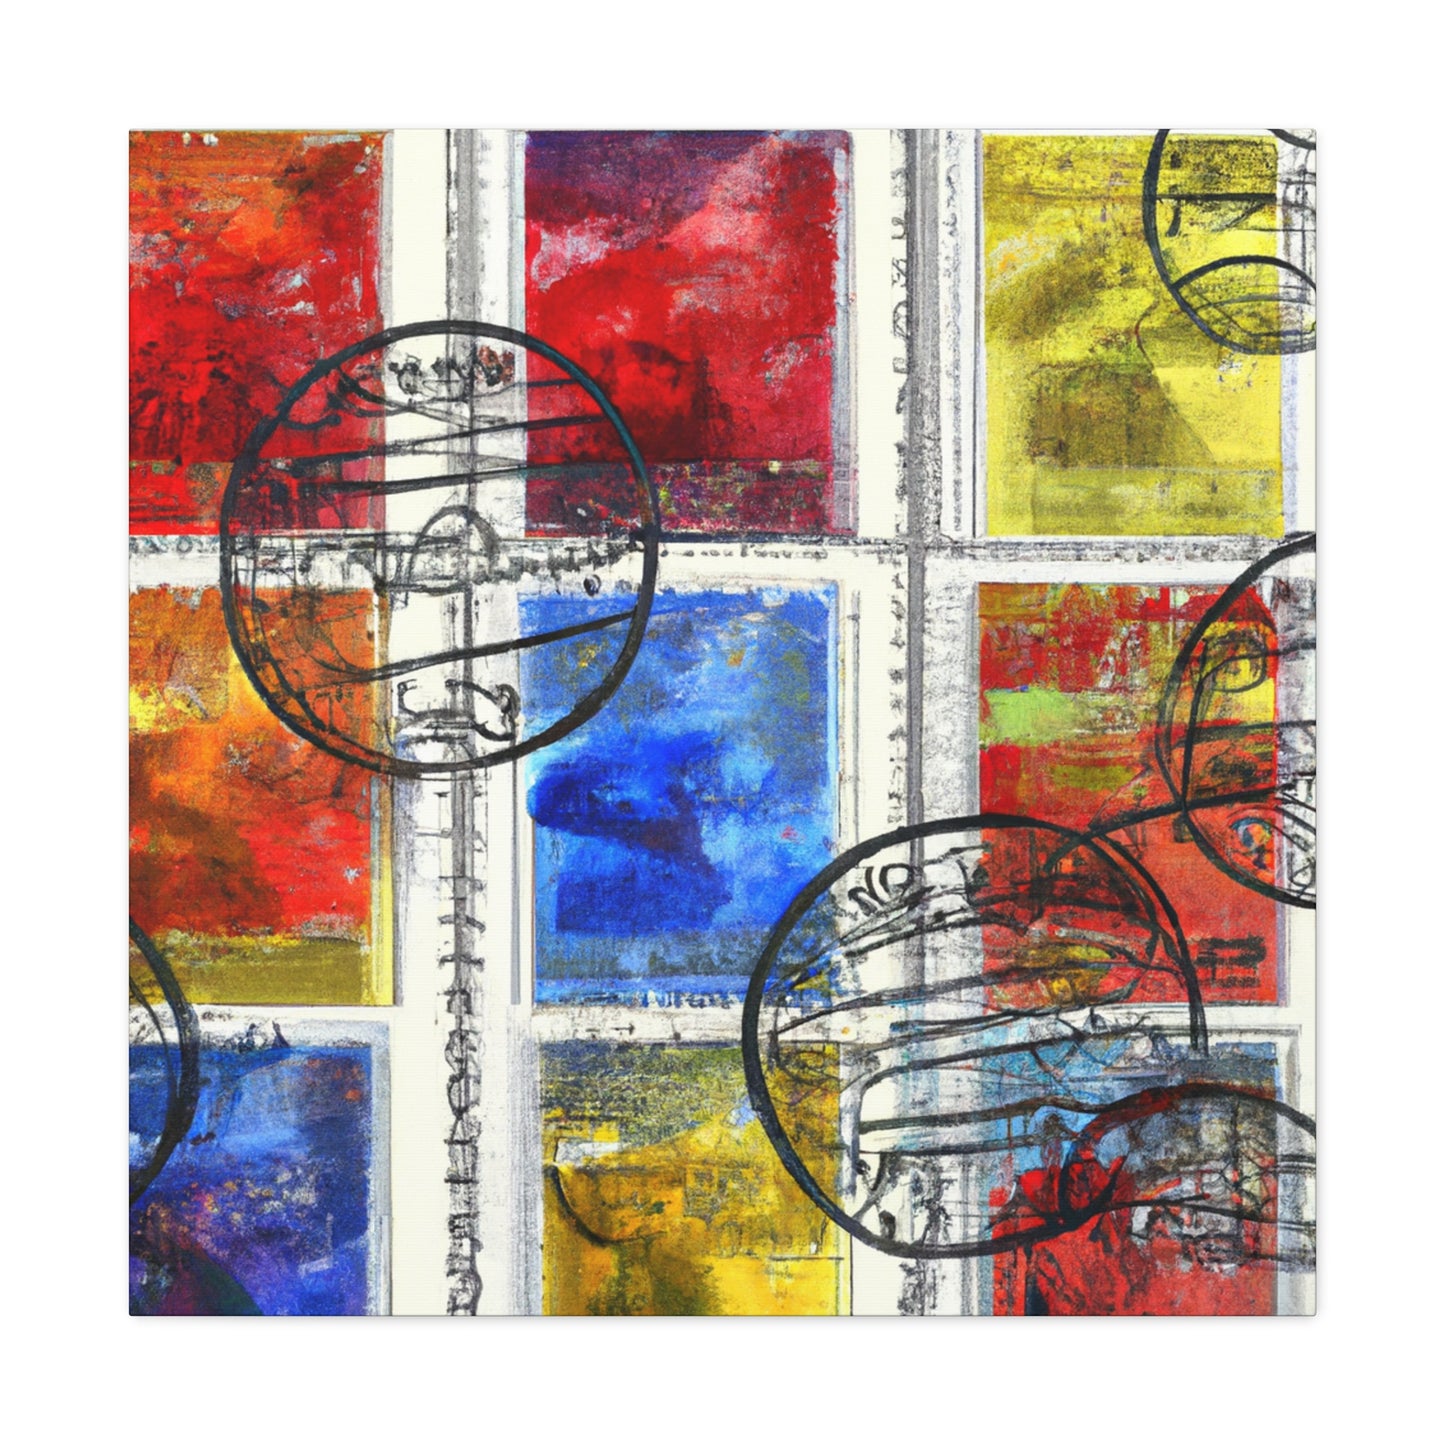 International Migration Stamps. - Postage Stamp Collector Canvas Wall Art